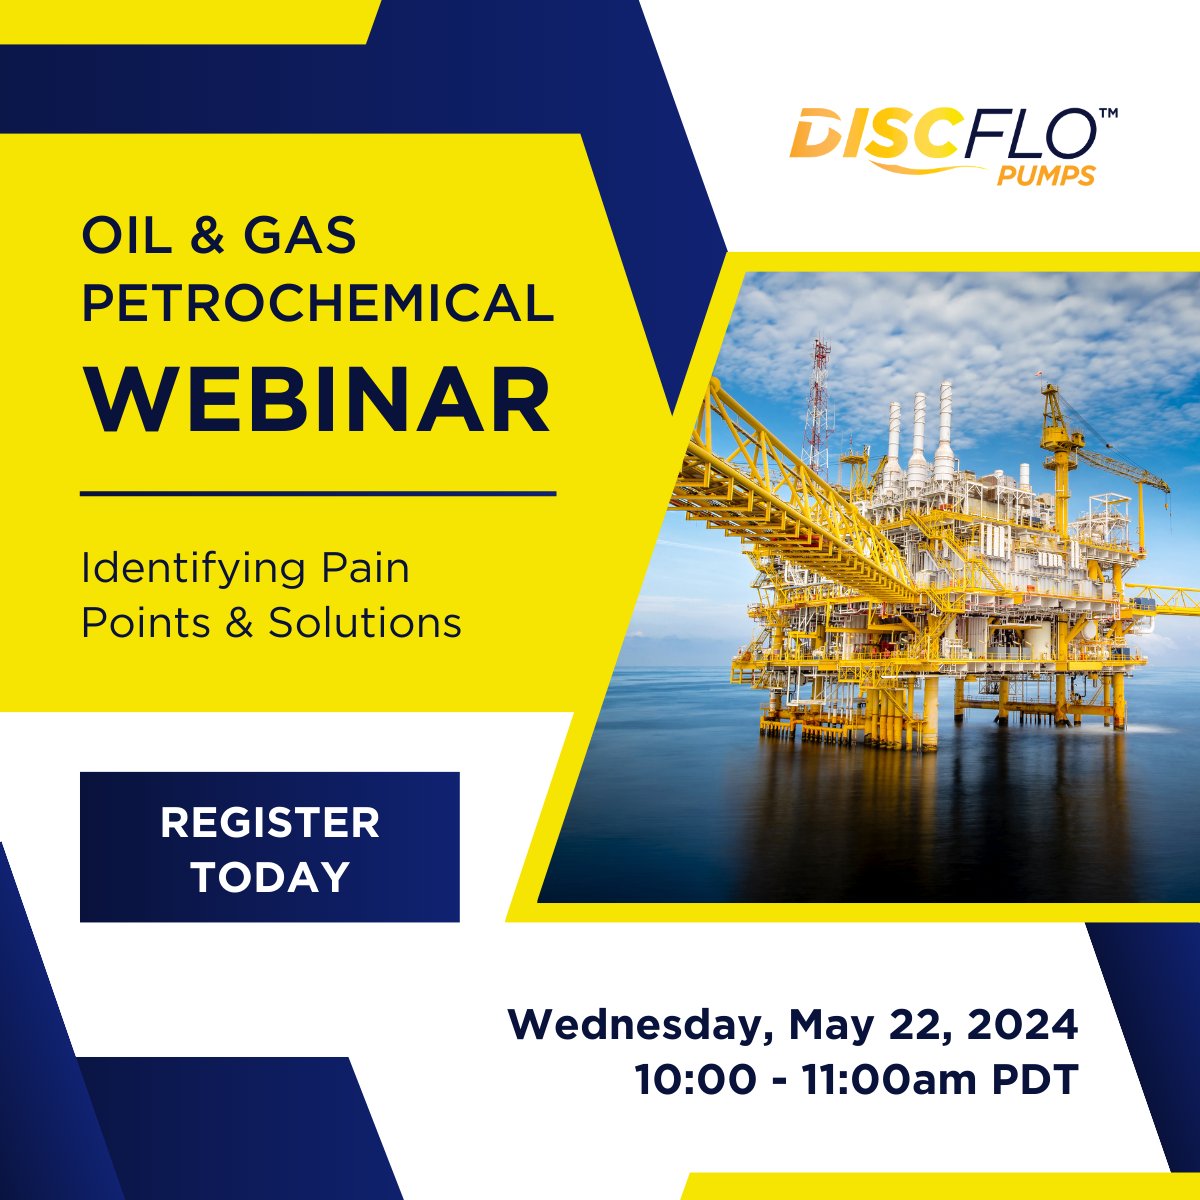 Big News Alert! Dive into the world of oil, gas & #petrochemicals! Join our upcoming #webinar as industry experts discuss industry pain points & solutions. Discover crucial factors for selecting industrial pumps in #OilandGas operations. Register here: bit.ly/49W3CKv